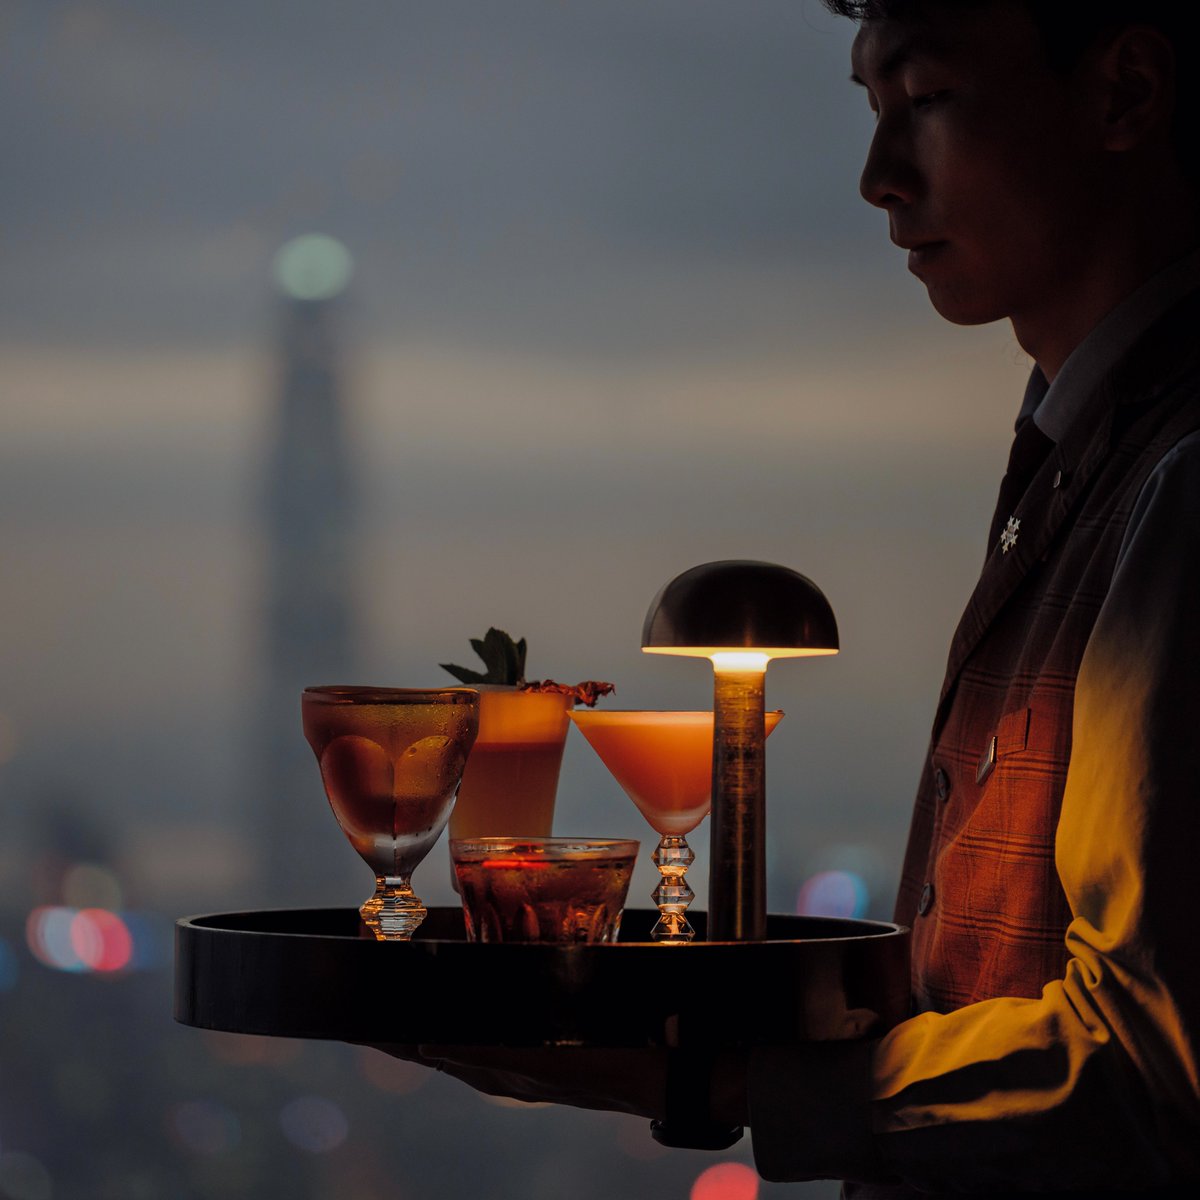 Embark on a sensory journey with @Baccarat and Mandarin Oriental, Shenzhen, to discover the exquisite Ripples of Spring themed cocktails at the illustrious MO BAR. #Baccarat x #MandarinOrientalShenzhen, an unforgettable mixology experience. #BaccaratCocktailWorldTour #MOBAR